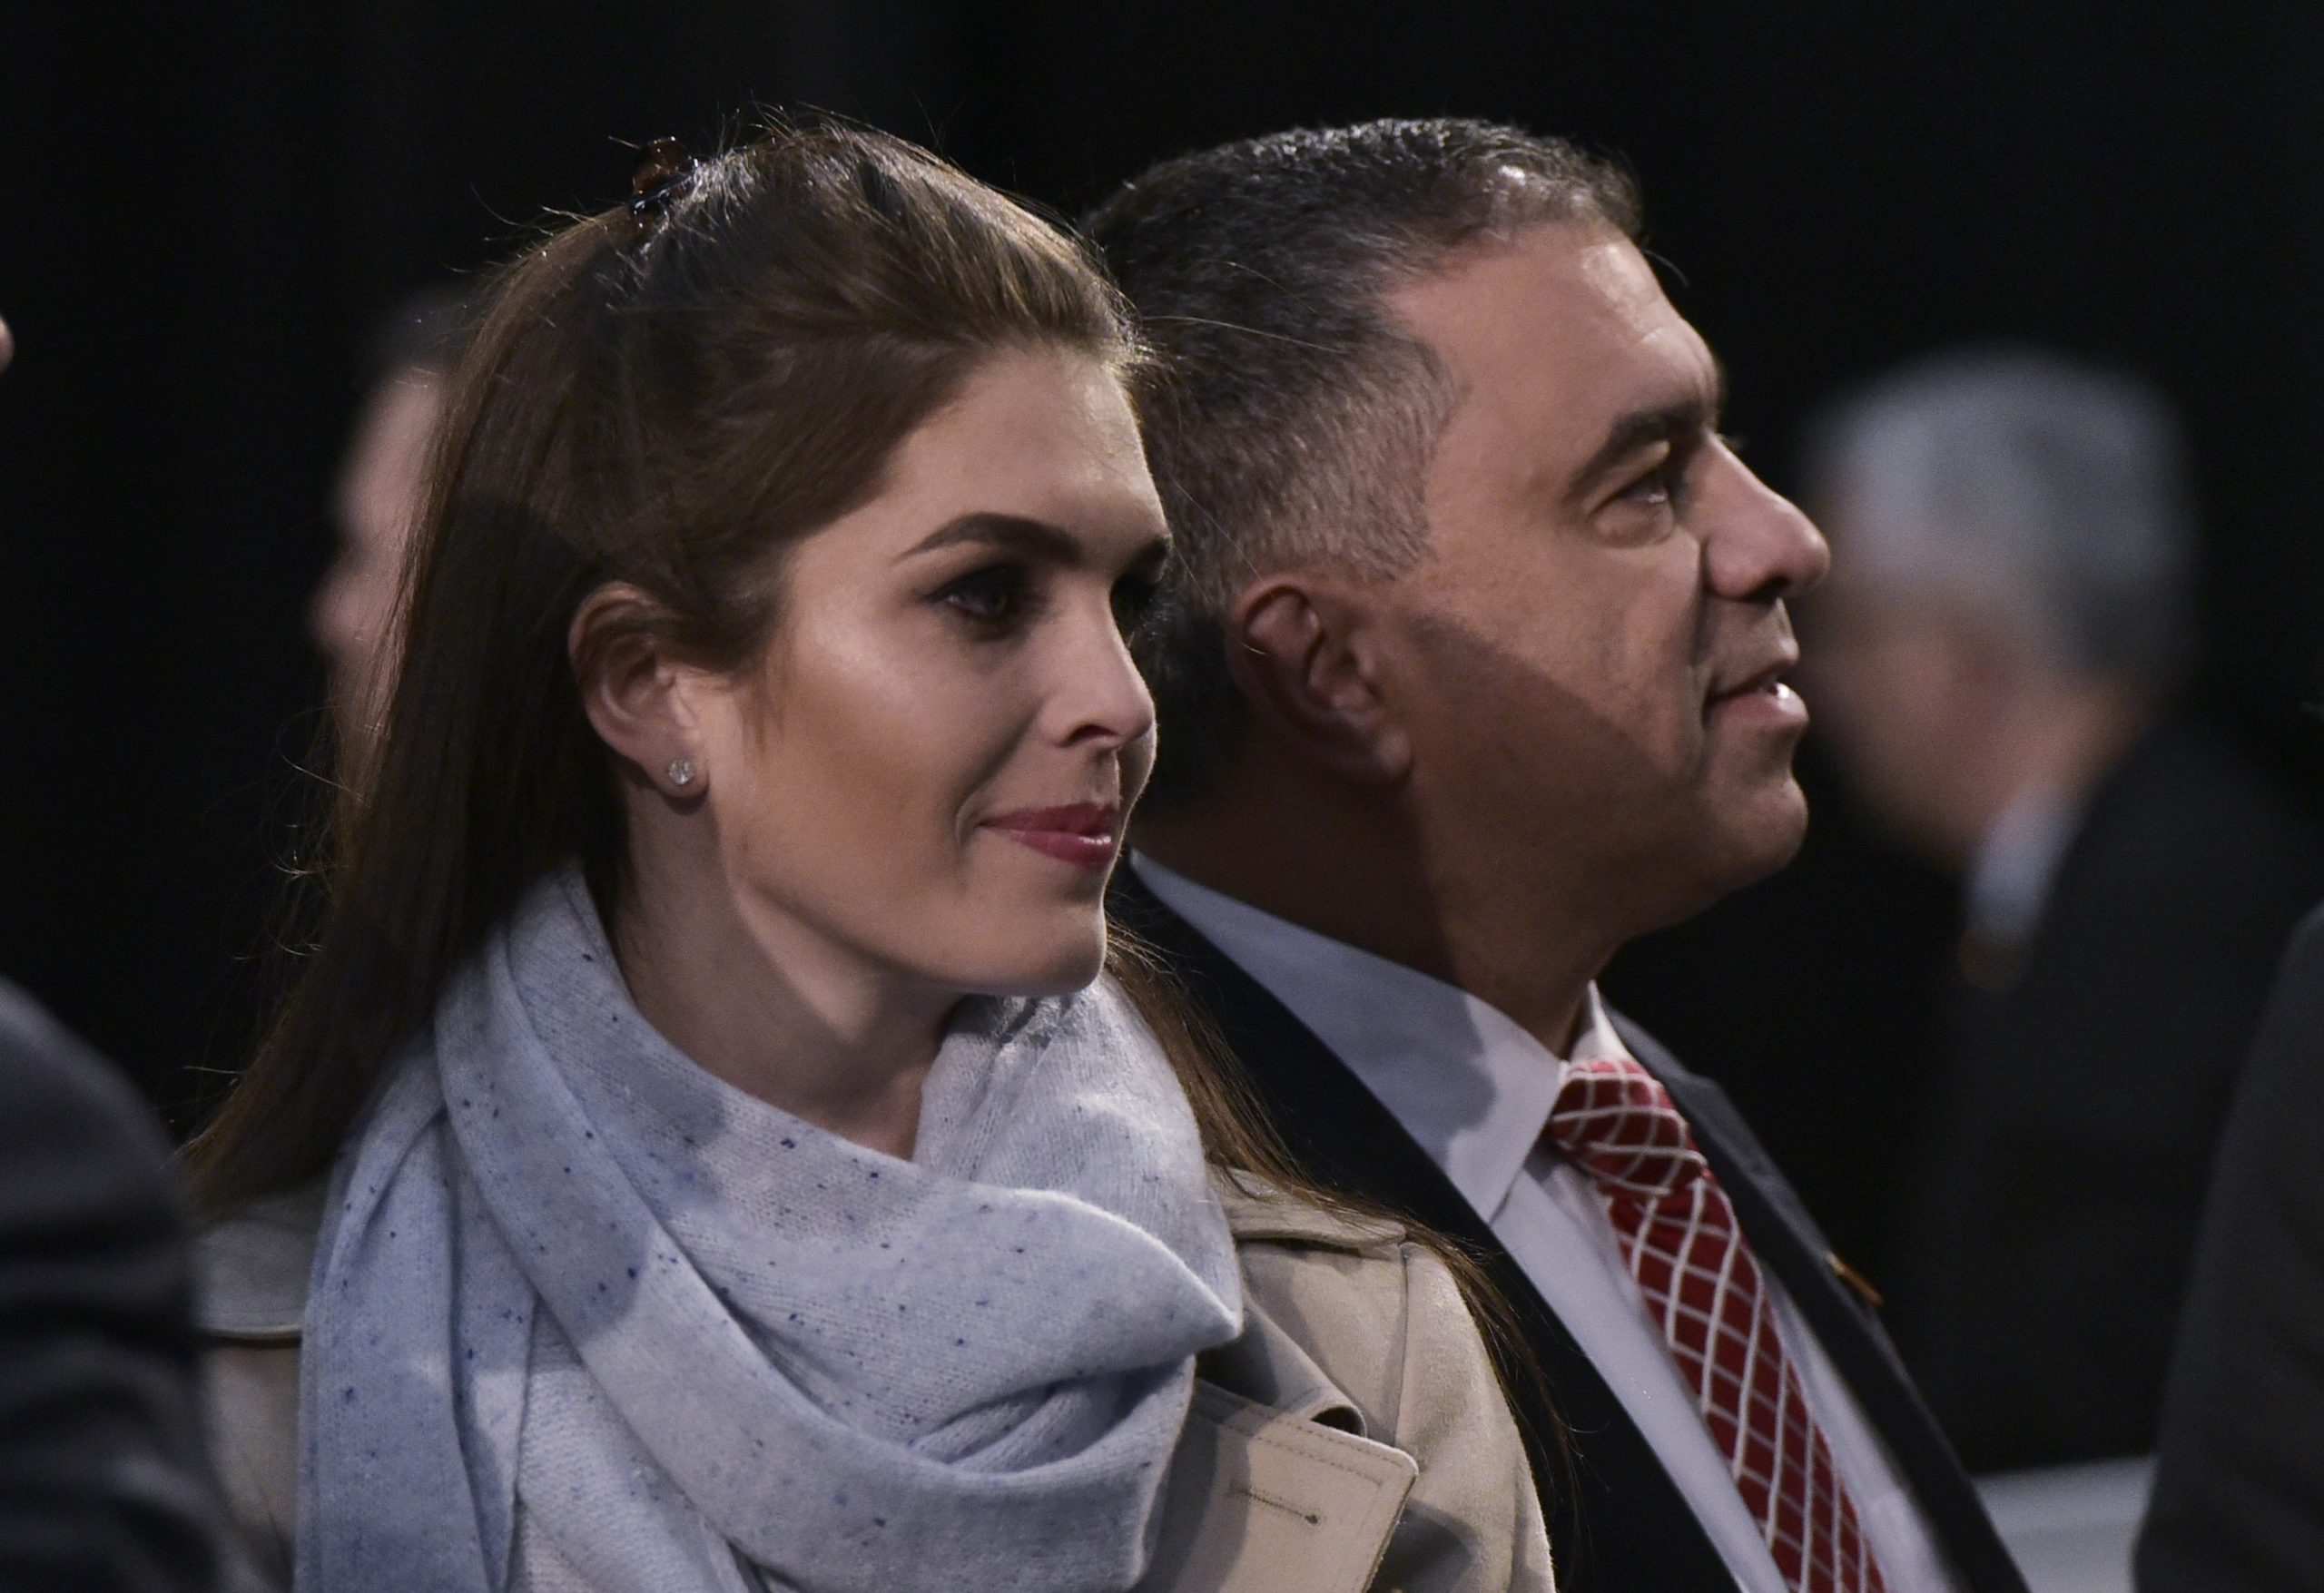 Hope Hicks (L) and David Bossie, Trump deputy campaign manager, watch as Republican presidential nominee Donald Trump addresses the final rally of his 2016 presidential campaign at Devos Place in Grand Rapids, Michigan on November 7, 2016. (MANDEL NGAN/AFP via Getty Images)